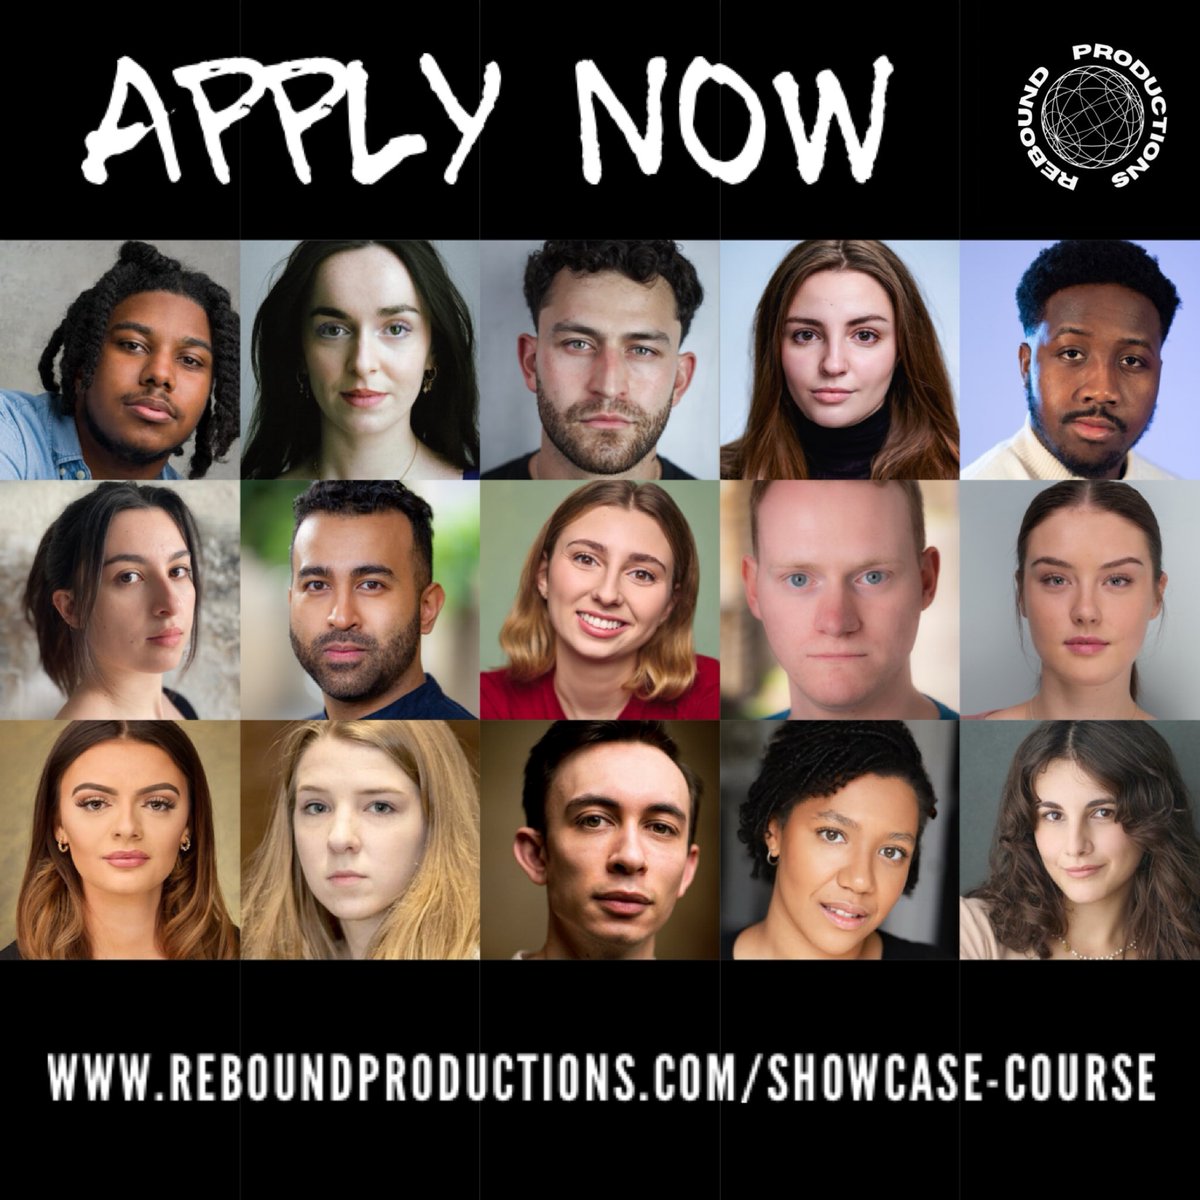 All these fantastic actors have either joined Spotlight, signed with an agent or both (!!!) after performing in our latest show @TheHenChickens Join our Summer Showcase and give your acting career a little boost 📈 ➡️More info & application form: reboundproductions.com/showcase-course